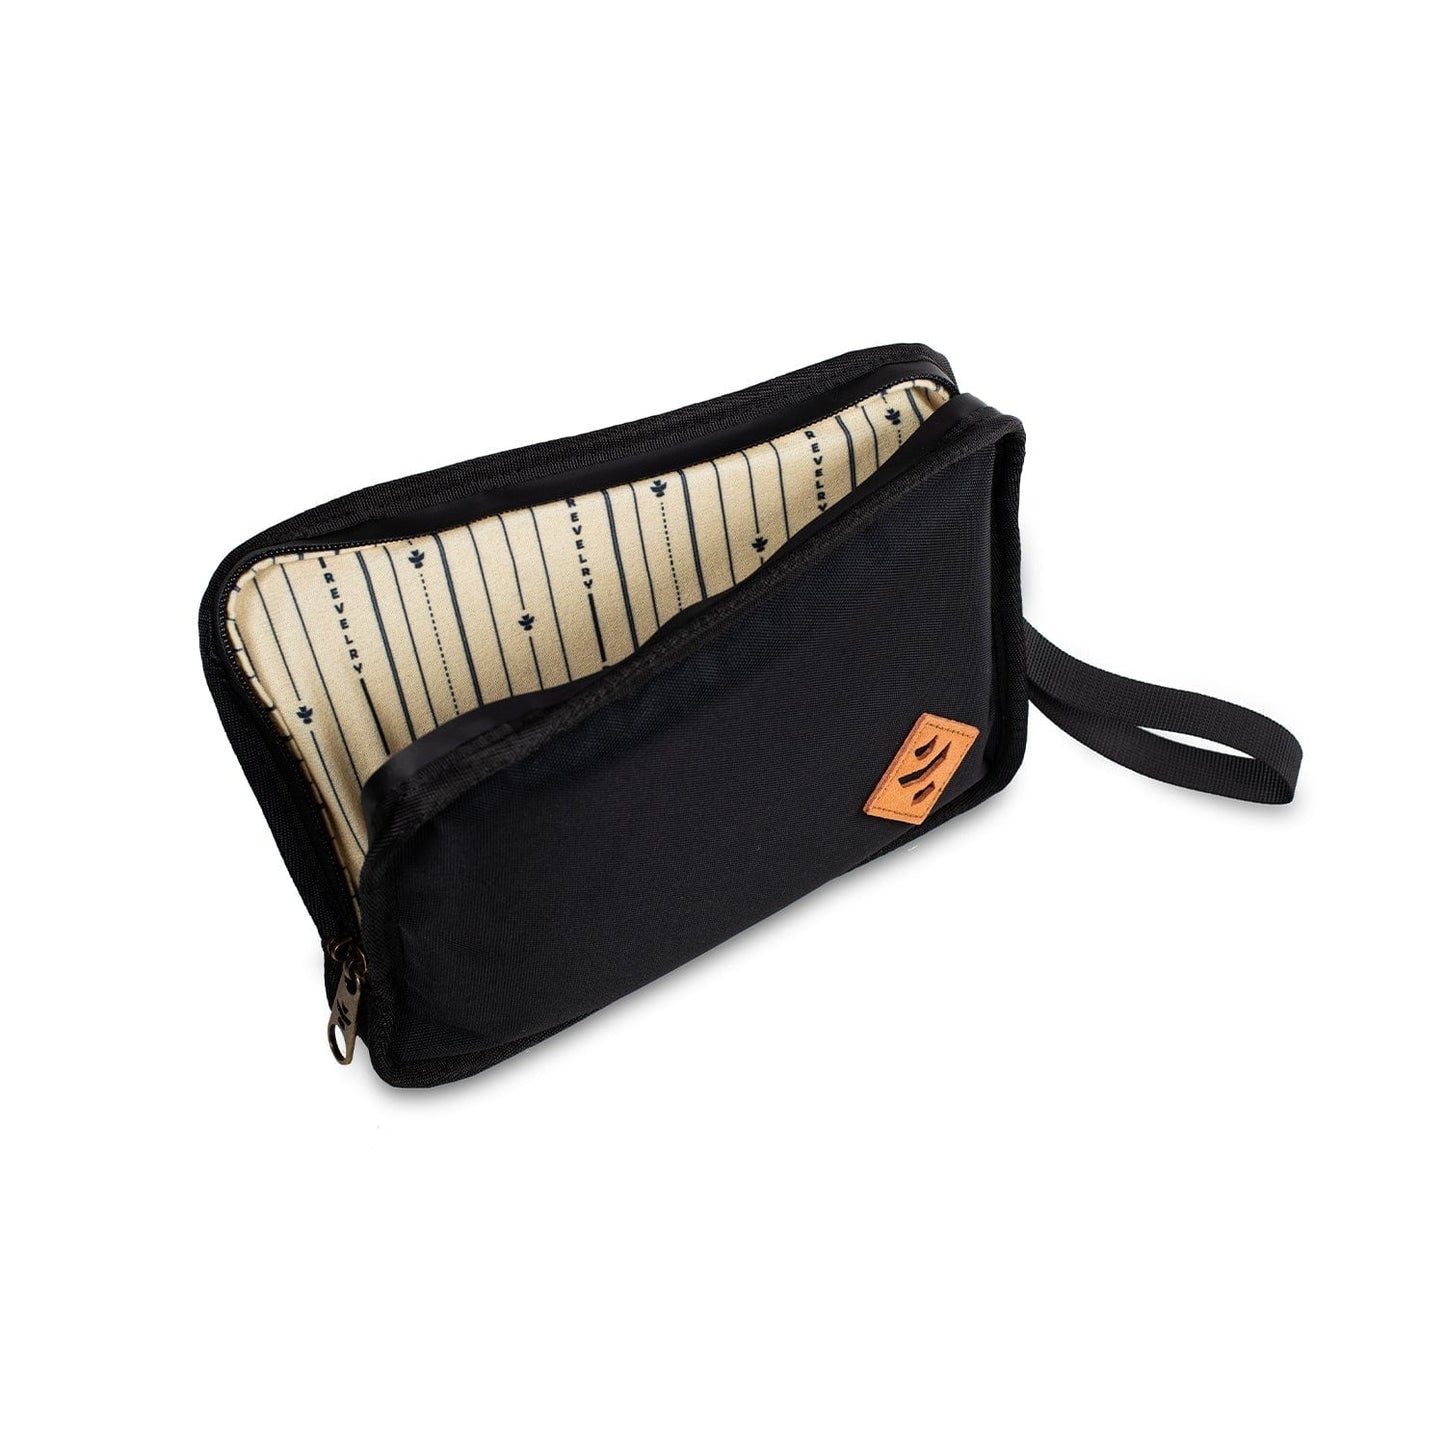 Revelry Supply The Gordo - Smell Proof Padded Pouch